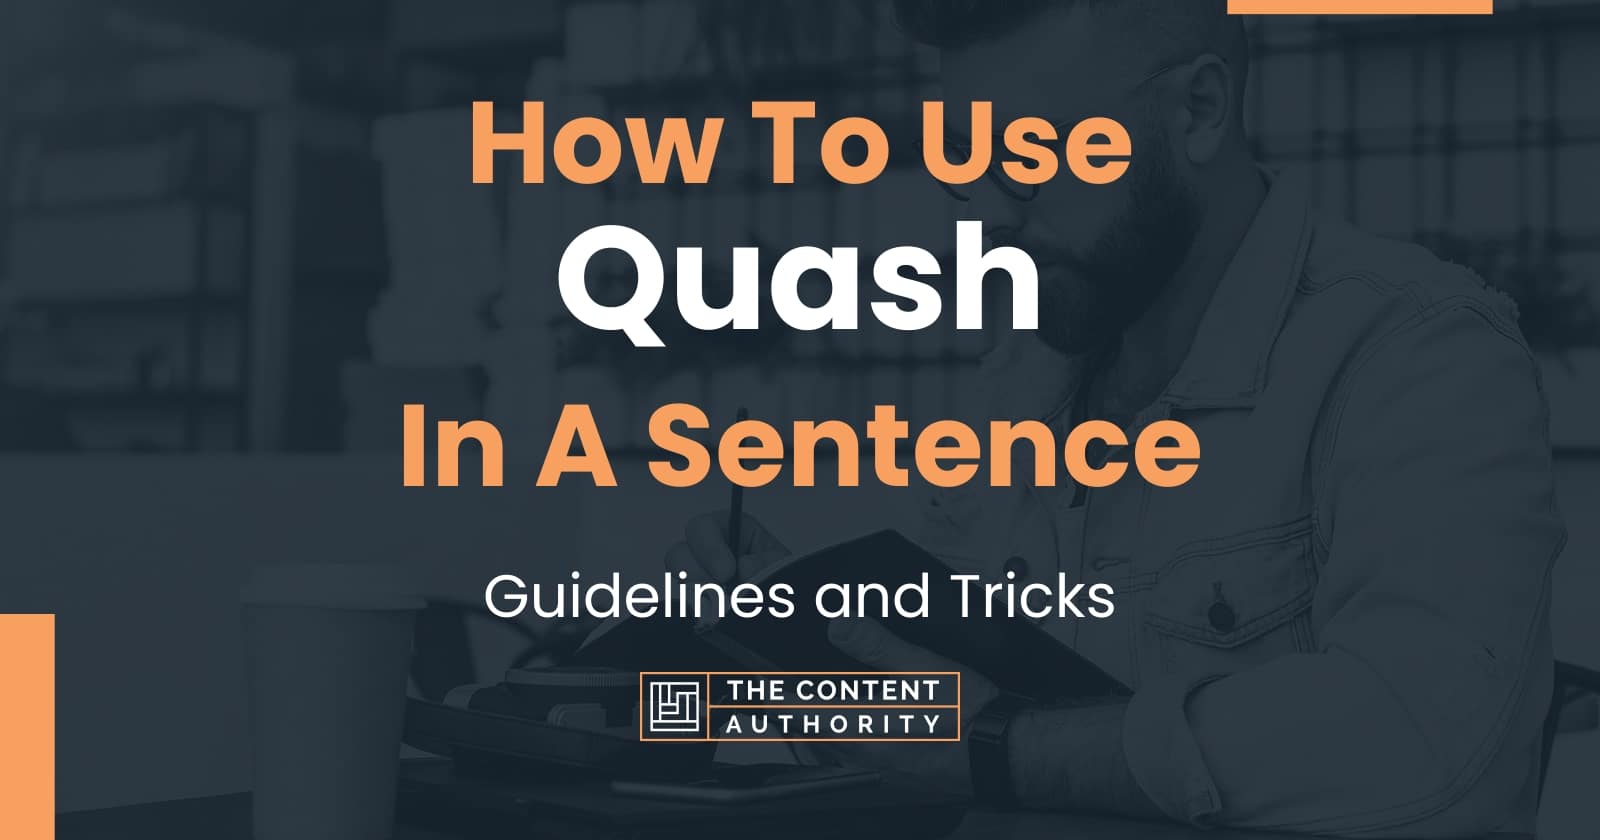 How To Use quot Quash quot In A Sentence: Guidelines and Tricks